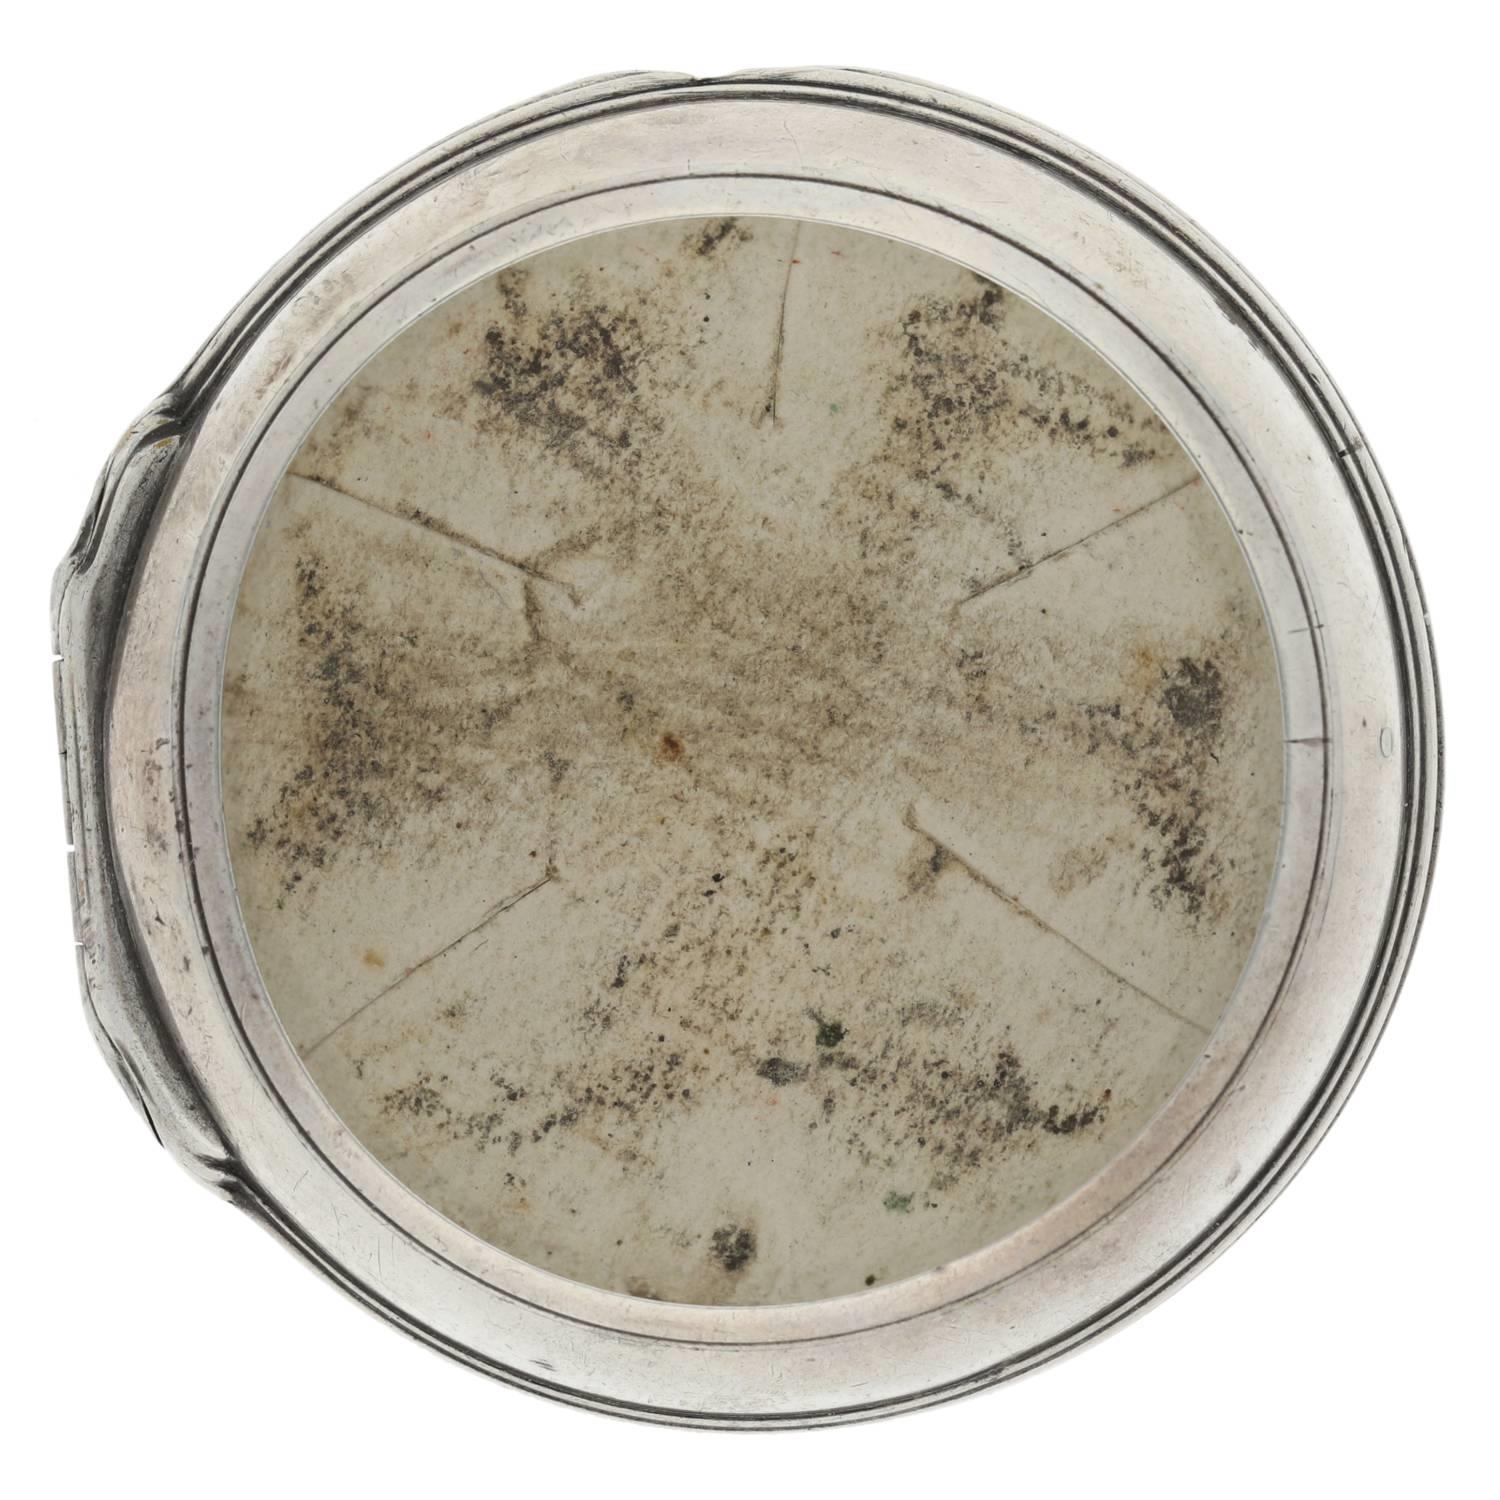 William Knight, West Marden - mid-18th century English silver pair cased verge pocket watch, - Image 10 of 10